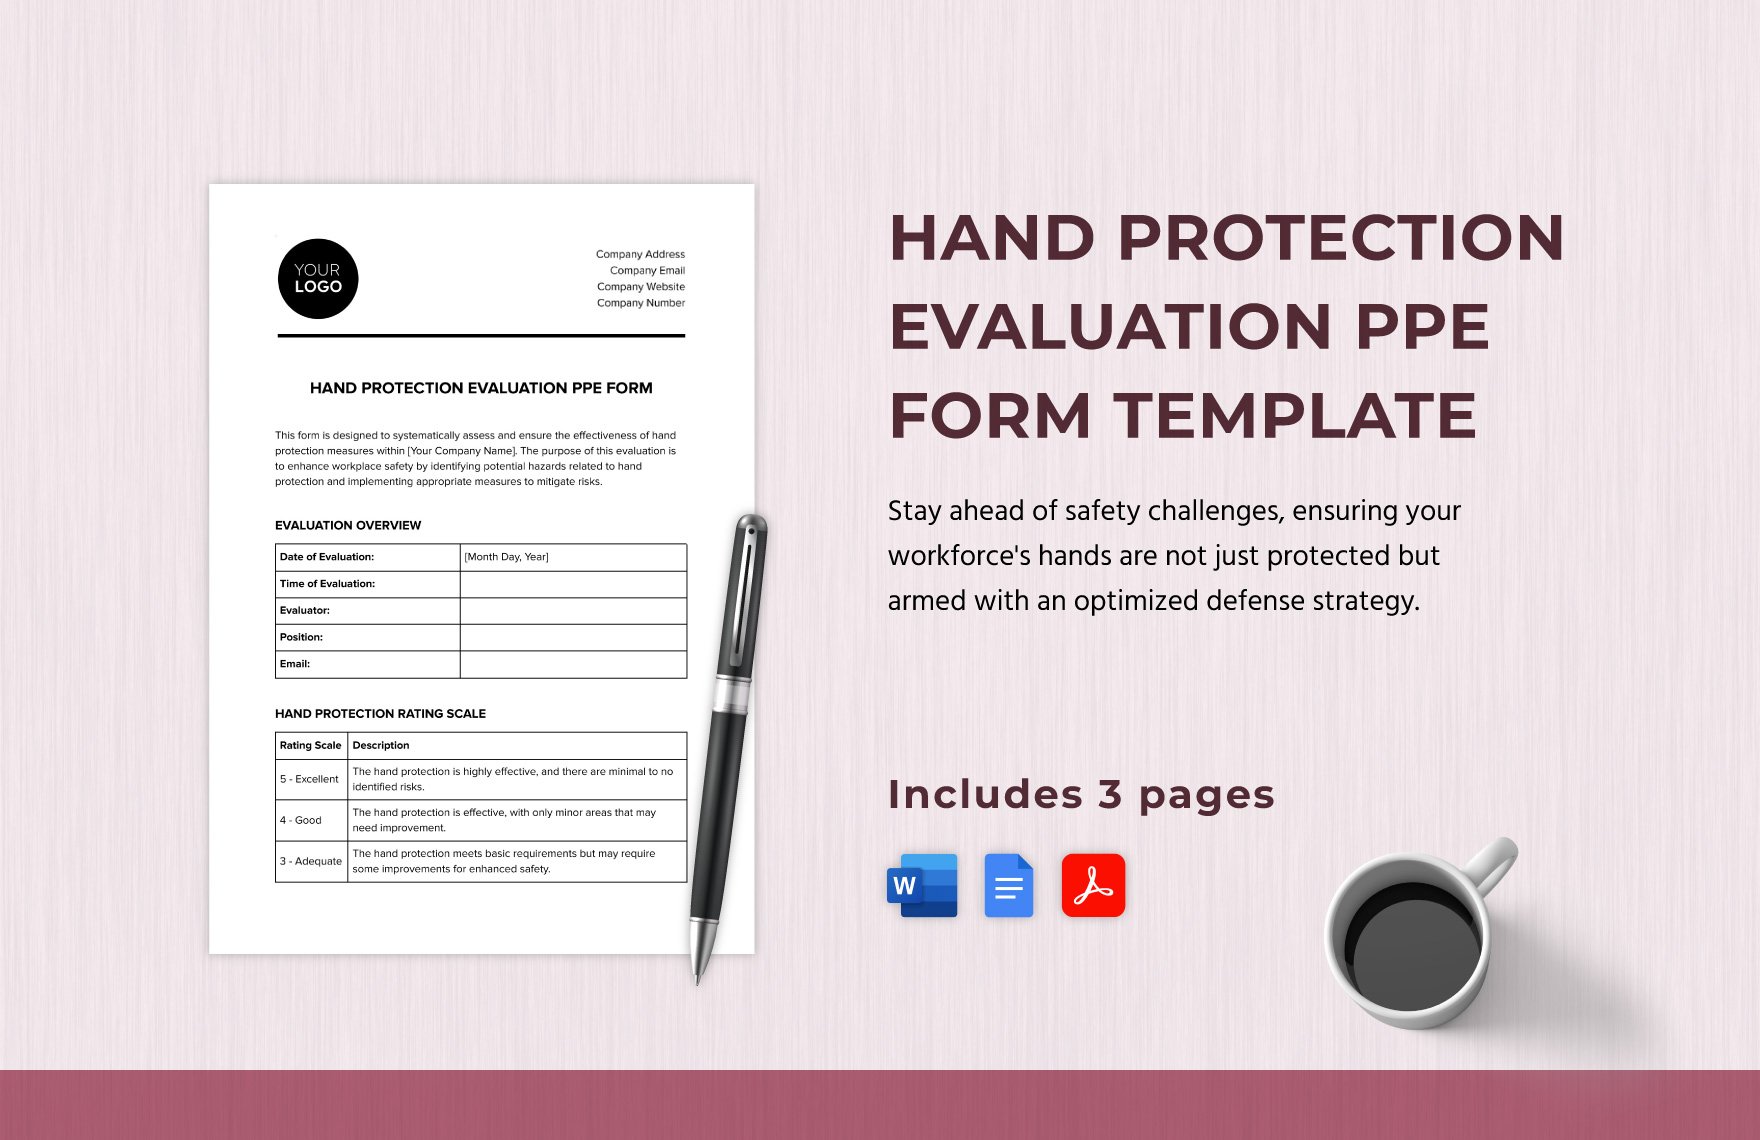 Hand Protection Evaluation PPE Form Template